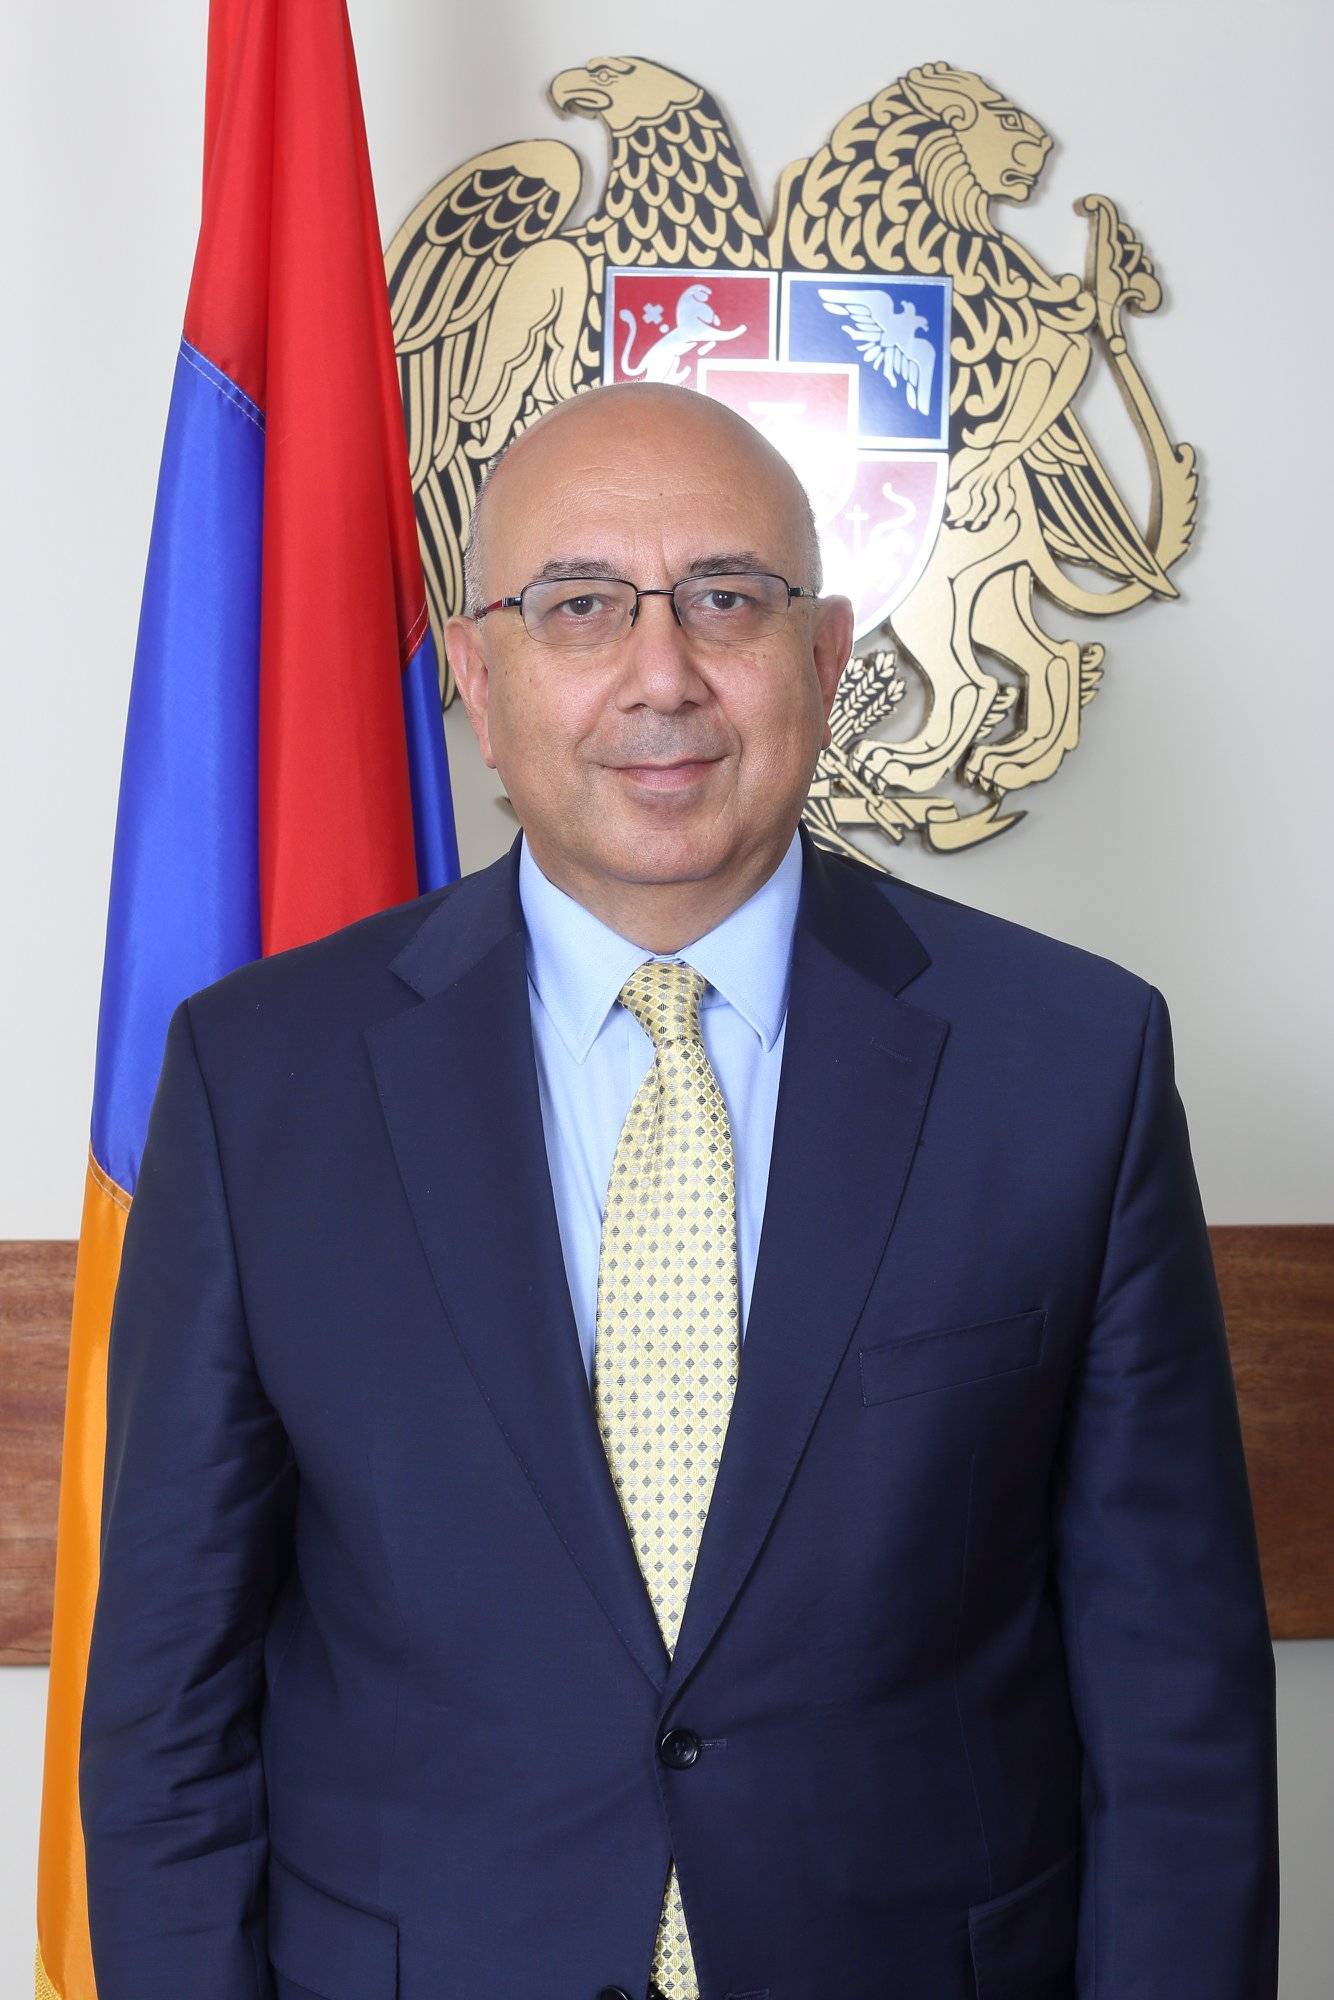 STATEMENT OF THE CONSUL GENERAL OF ARMENIA IN LOS ANGELES, AMBASSADOR EXTRAORDINARY AND PLENIPOTENTIARY ARMEN BAIBOURTIAN July 31, 2020